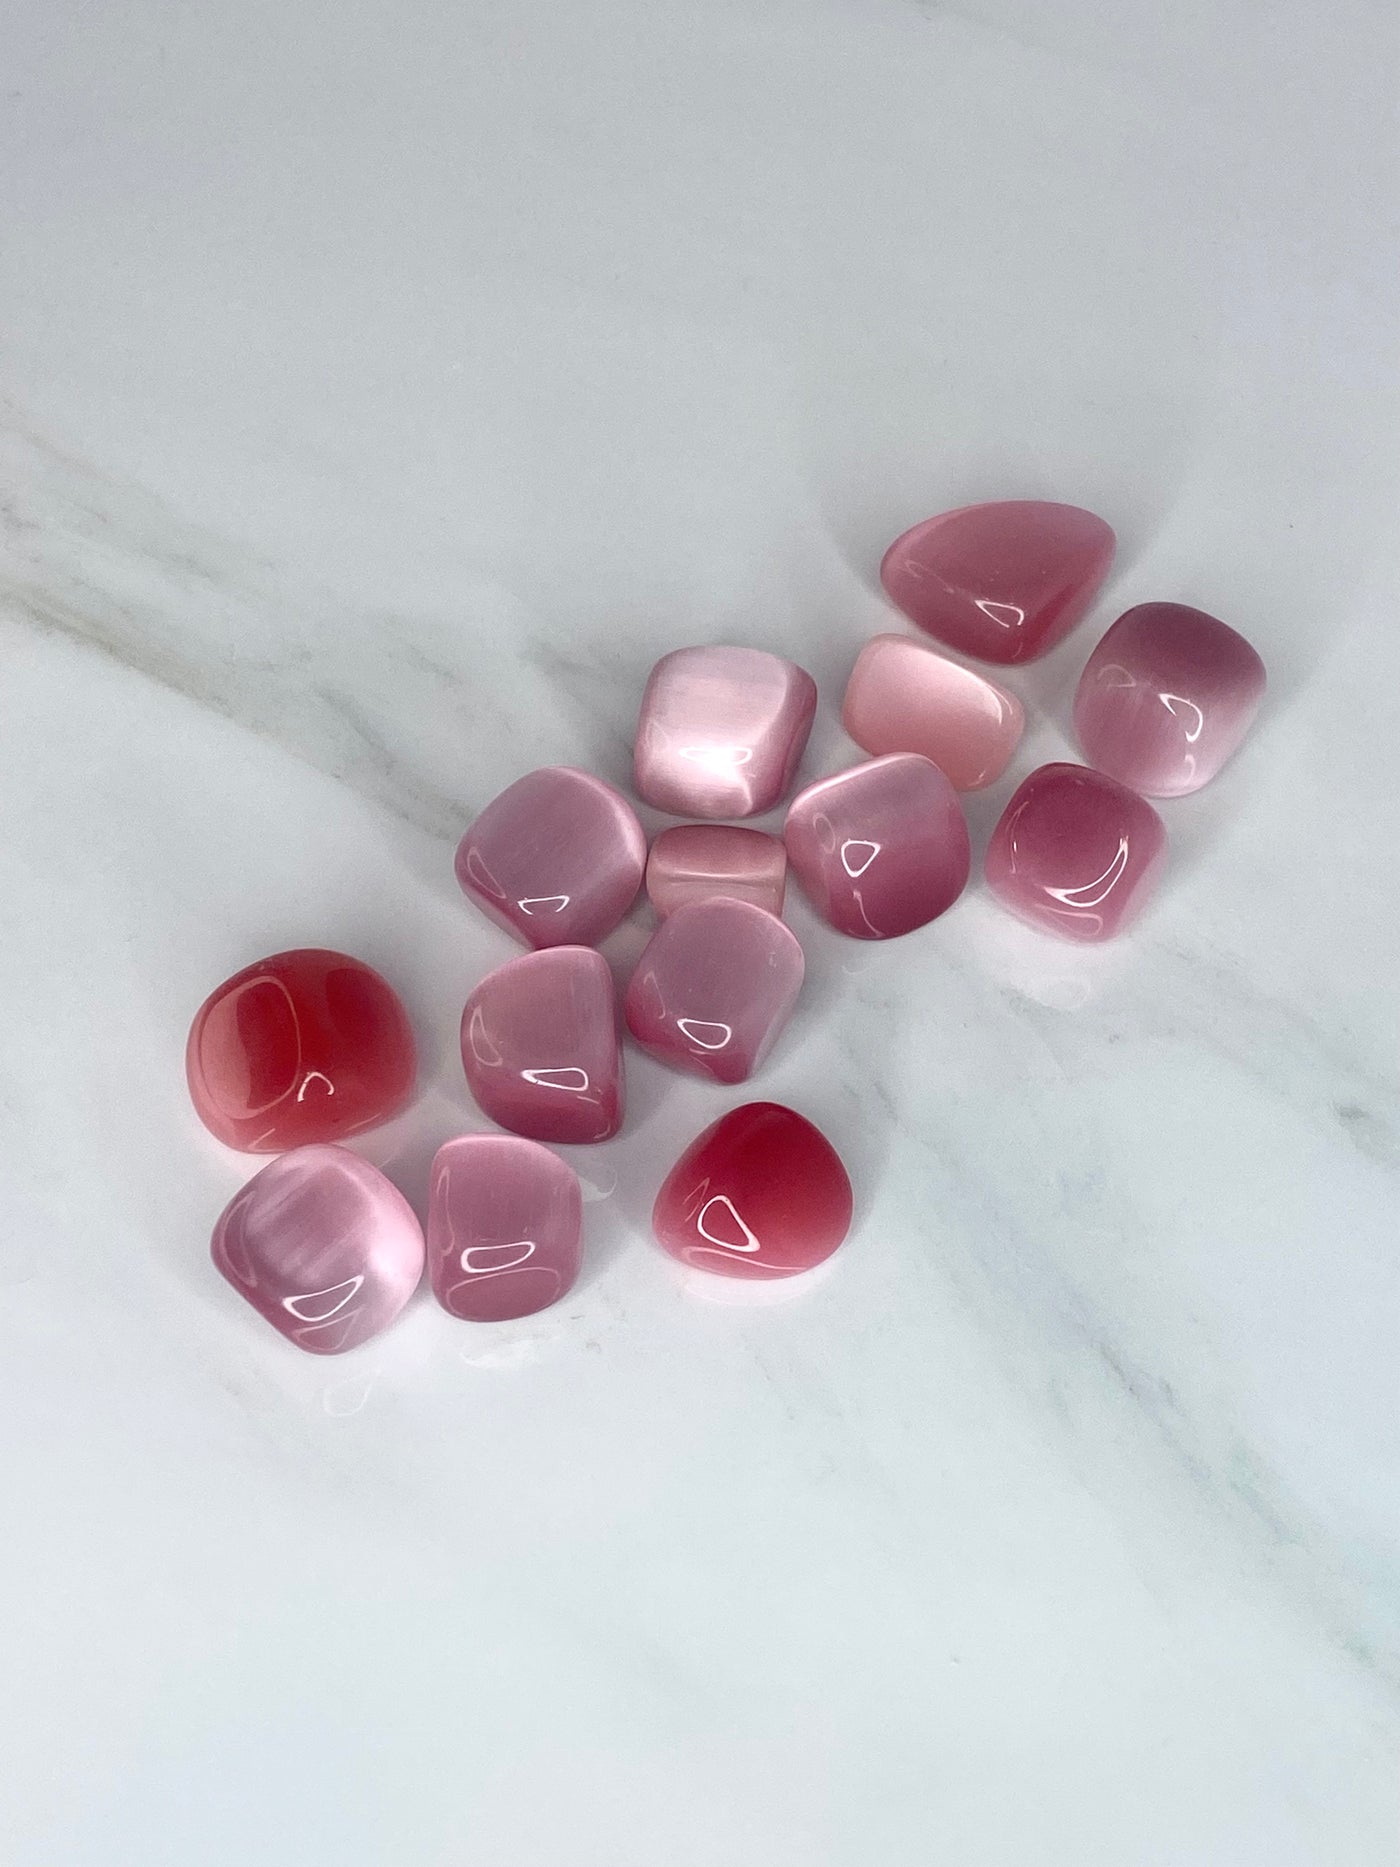 PINK CATS EYE - THE STONE OF POSITIVITY